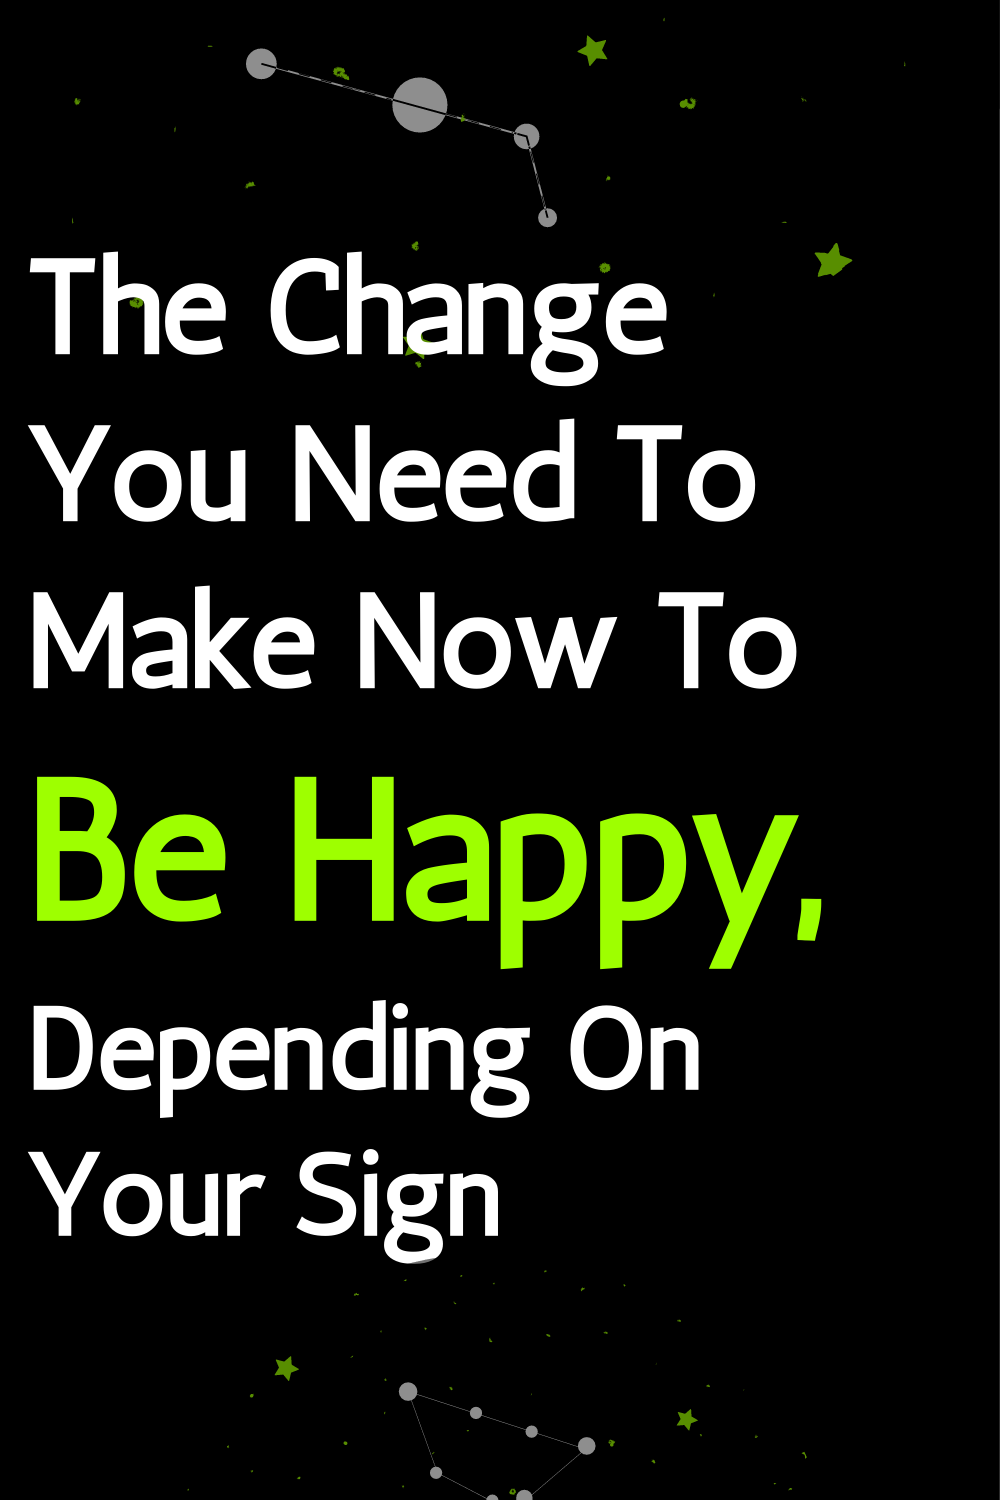 The Change You Need To Make Now To Be Happy, Depending On Your Sign